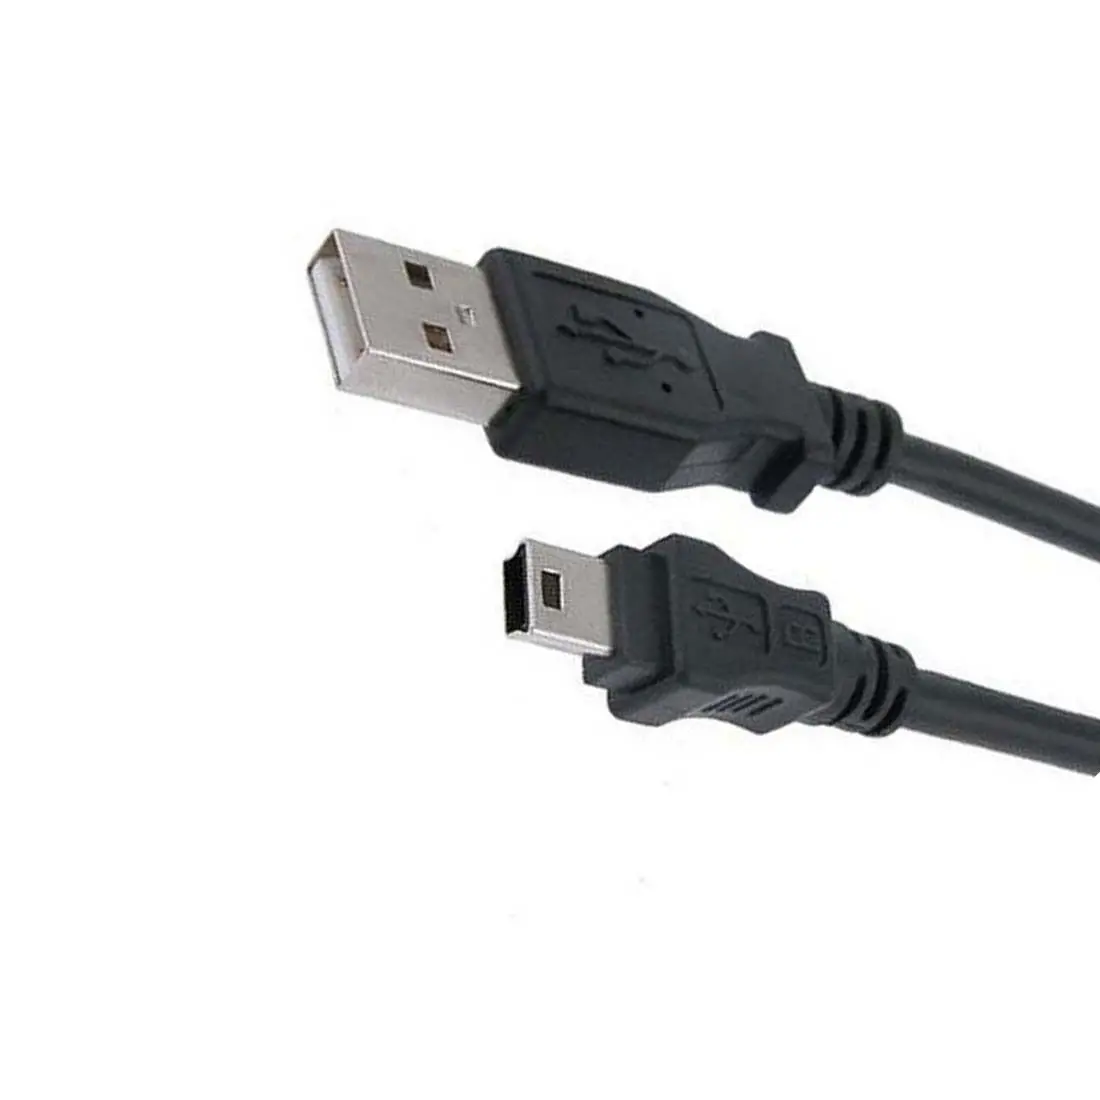 USB DATA CABLE LEAD FOR TOMTOM START 20 25 TOM TOM Micro 5 Pin 